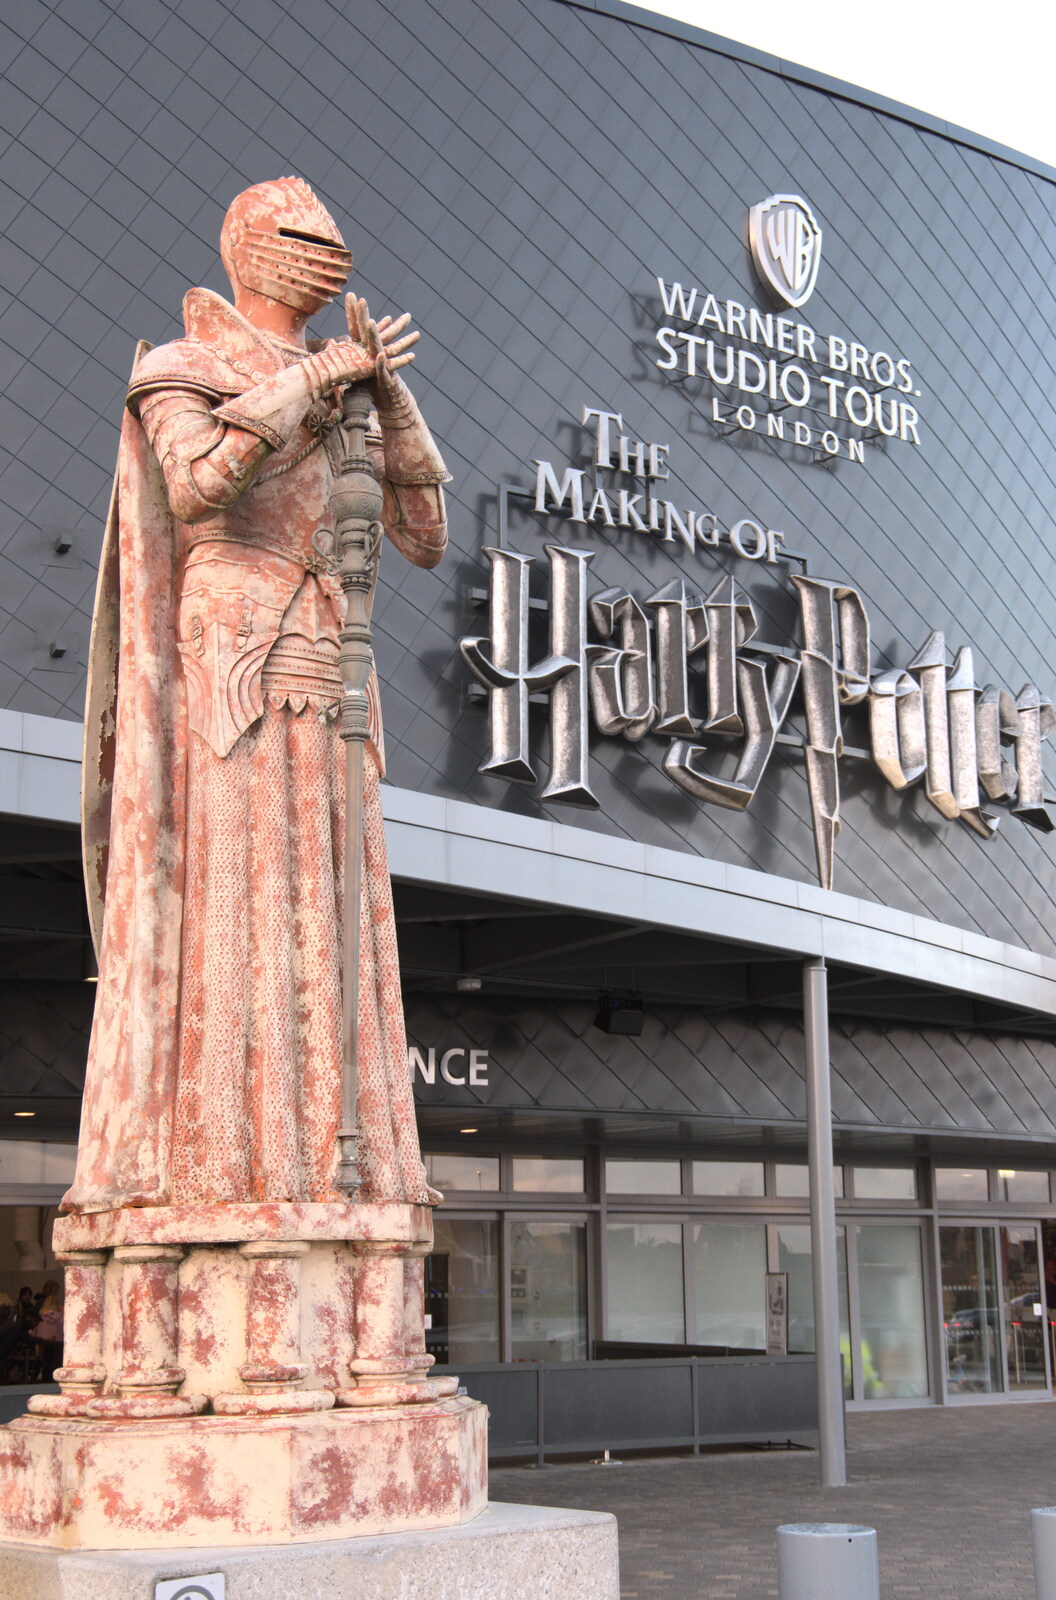 One of the Wizard Chess pieces from A Trip to Harry Potter World, Leavesden, Hertfordshire - 16th February 2020